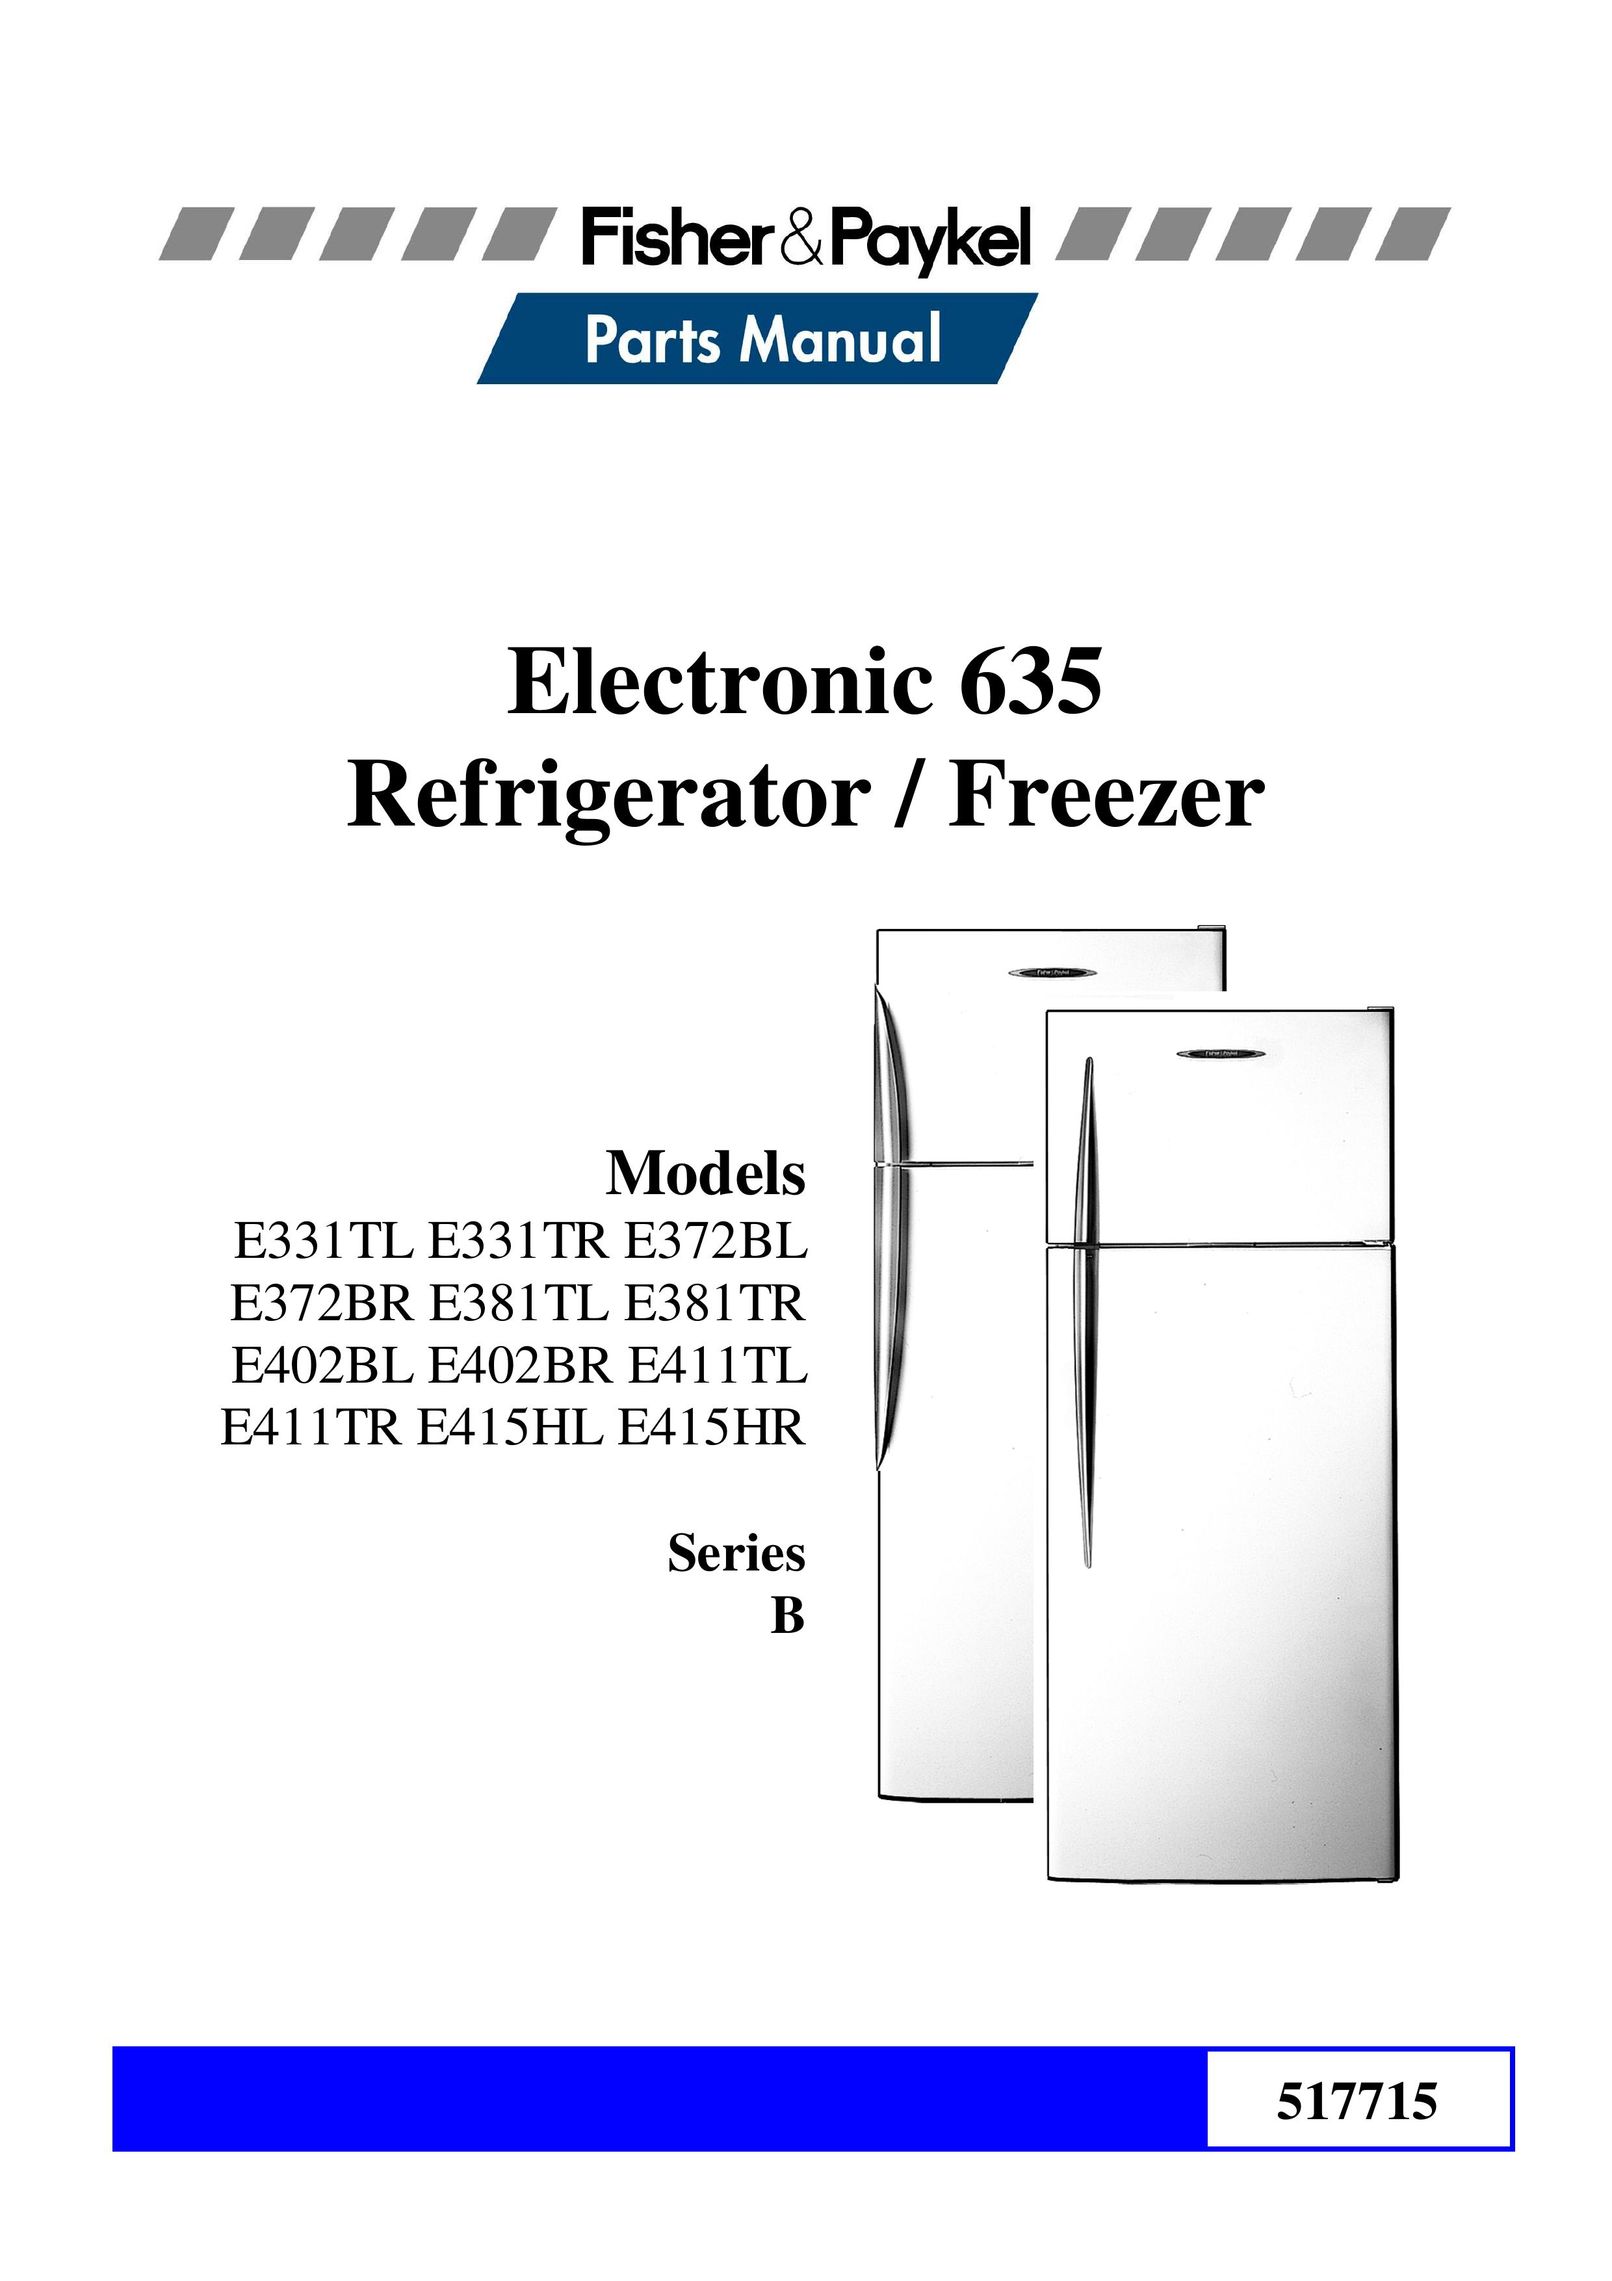 Fisher & Paykel E372BL Ice Maker User Manual